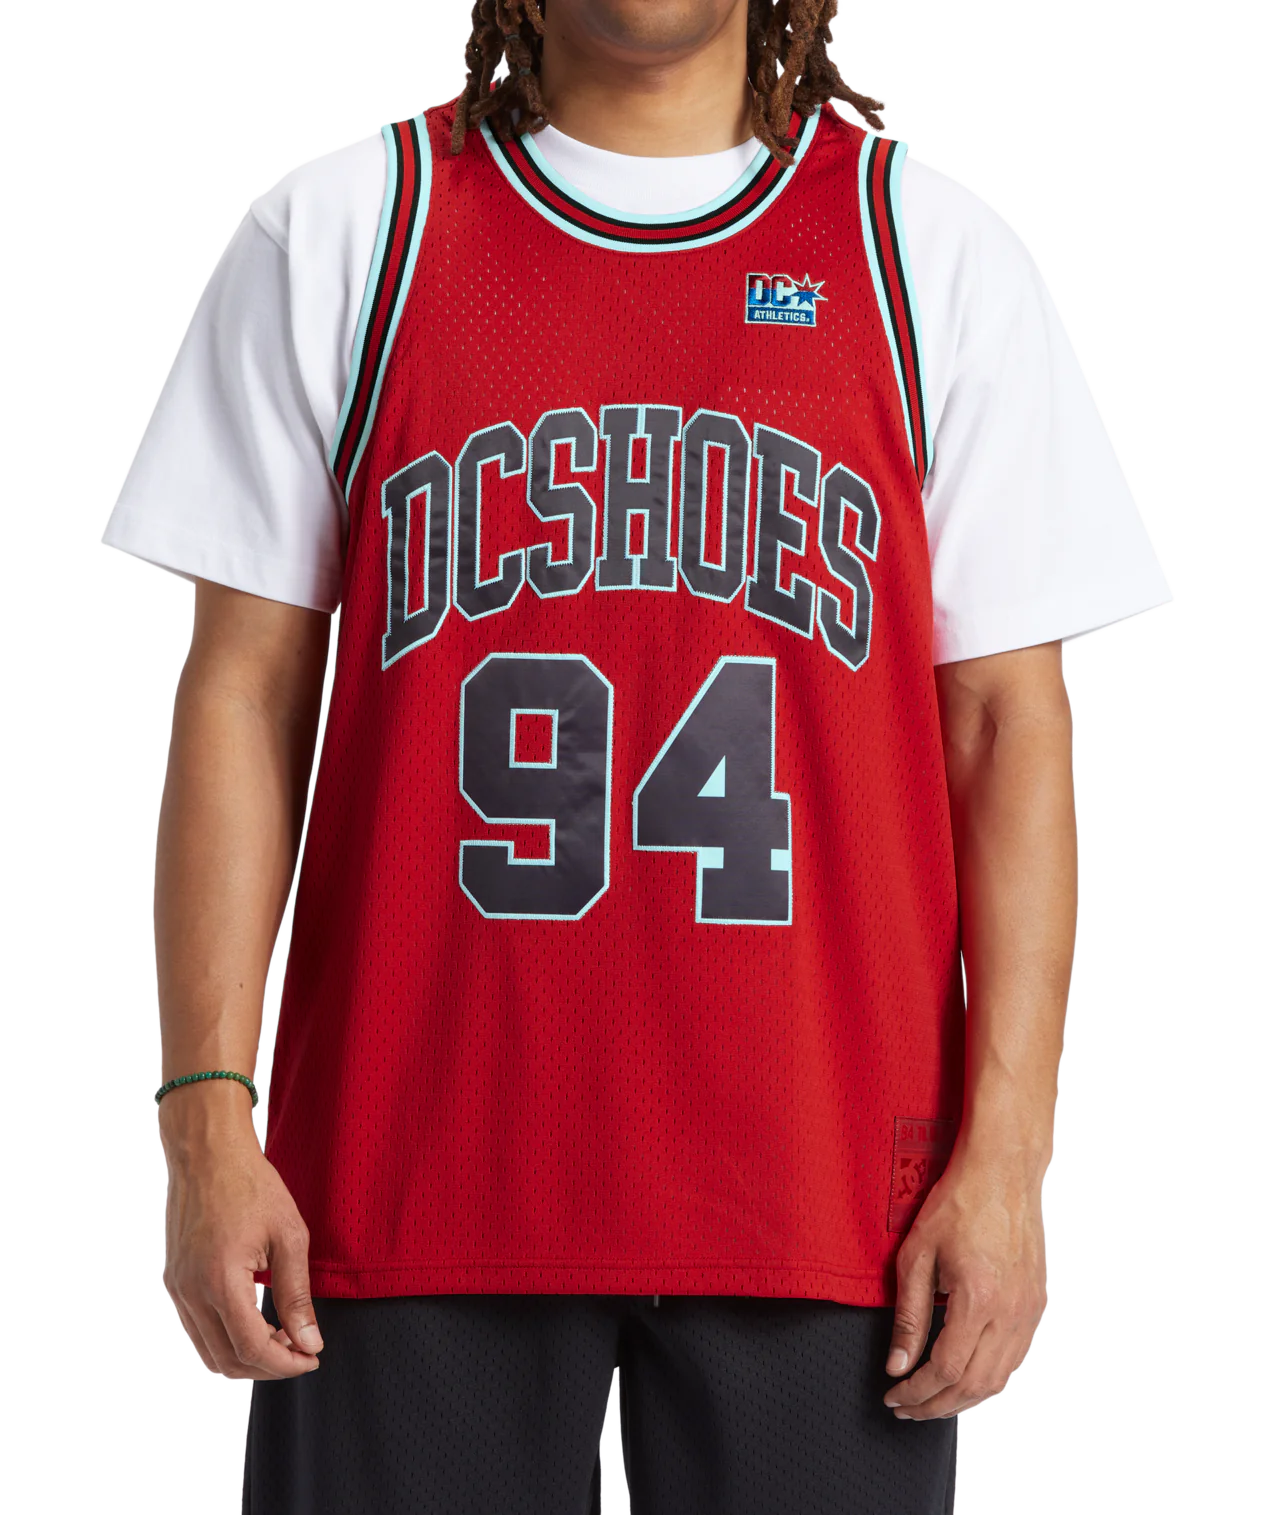 DC - SHY TOWN JERSEY - RED